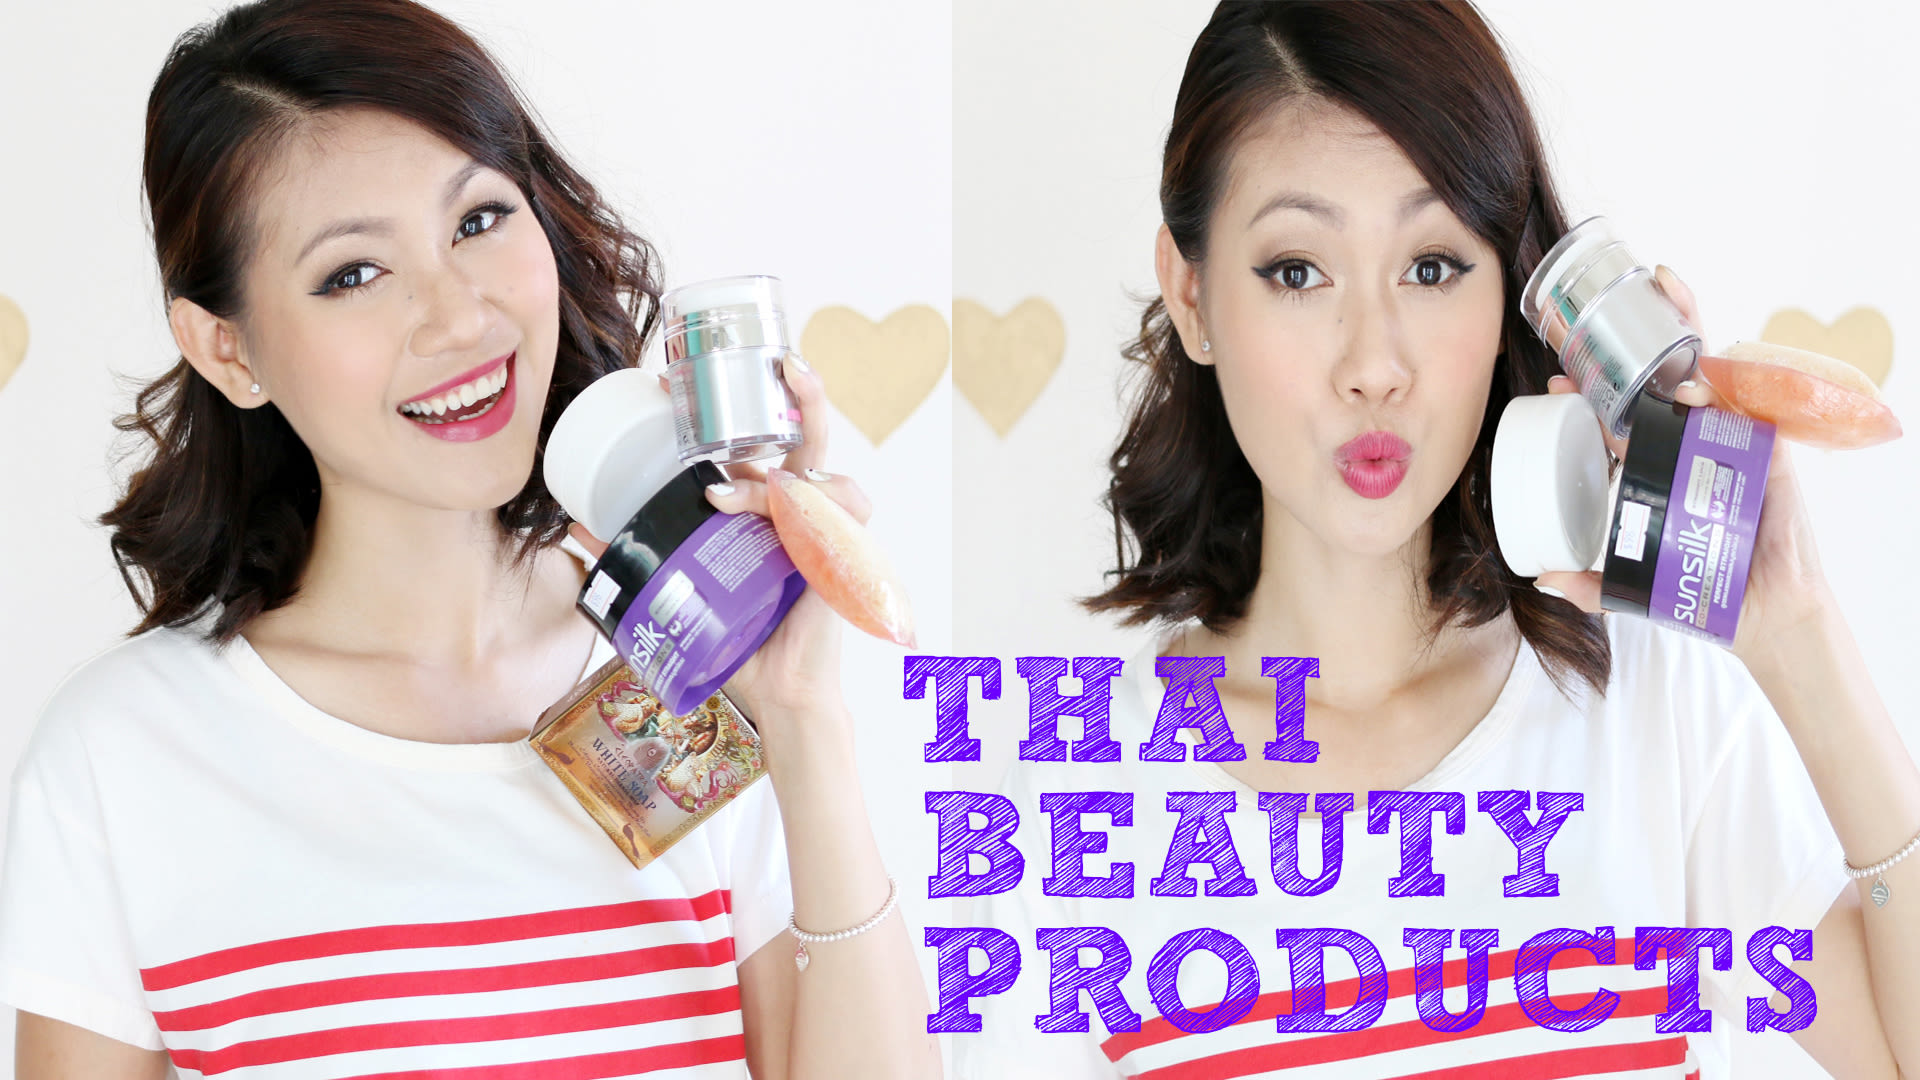 Watch 6 Hard-to-Find Thai Beauty Products, Allure Insiders